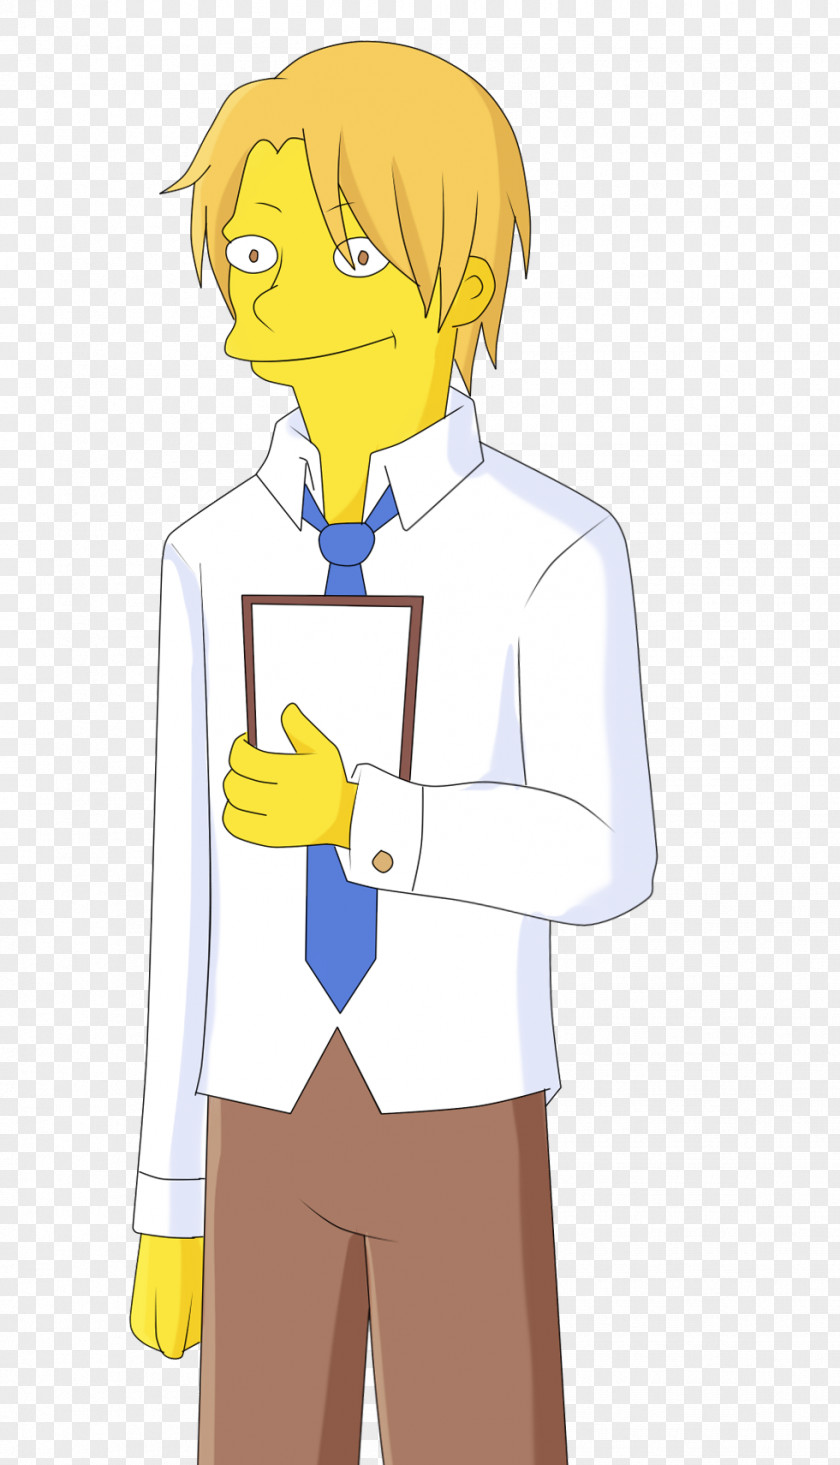 Os Simpsons Sleeve Thumb Homo Sapiens Top Outerwear PNG